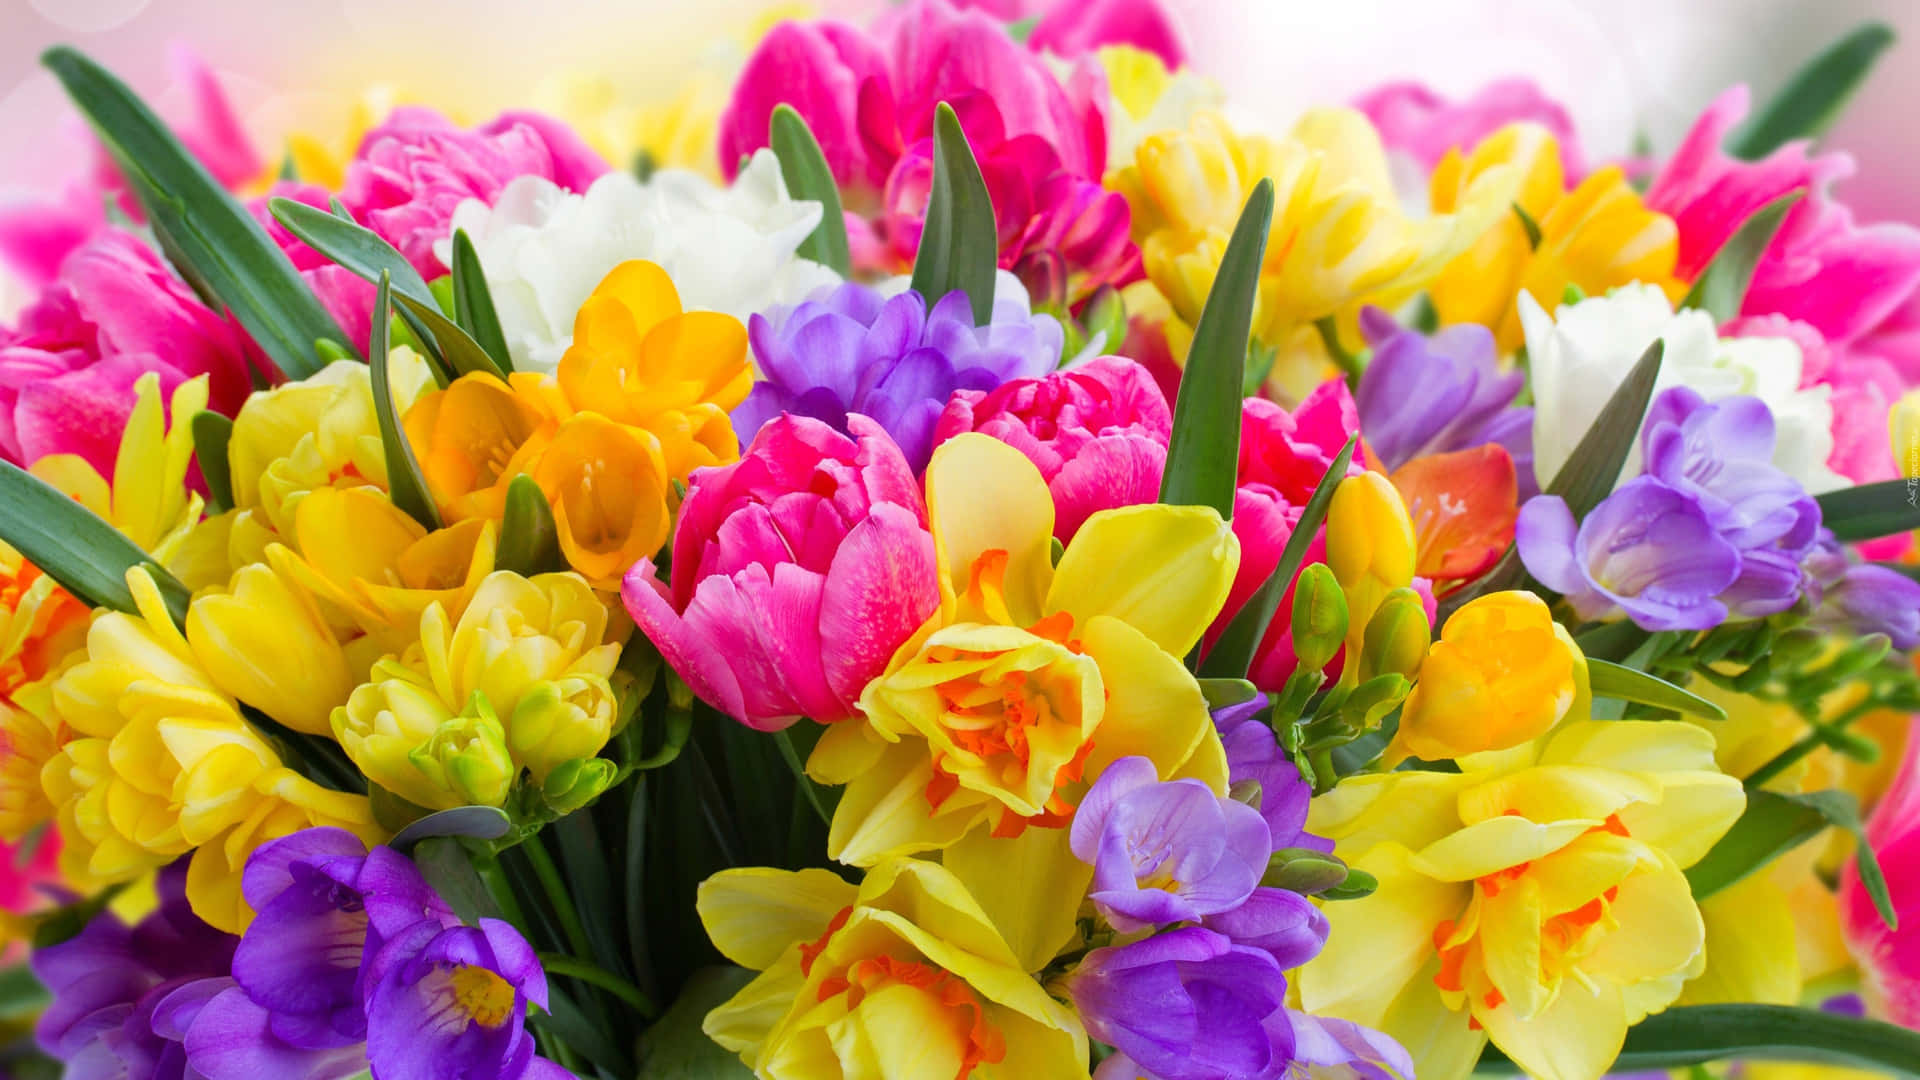 Vibrant and Colorful Flowers in Full Bloom Wallpaper